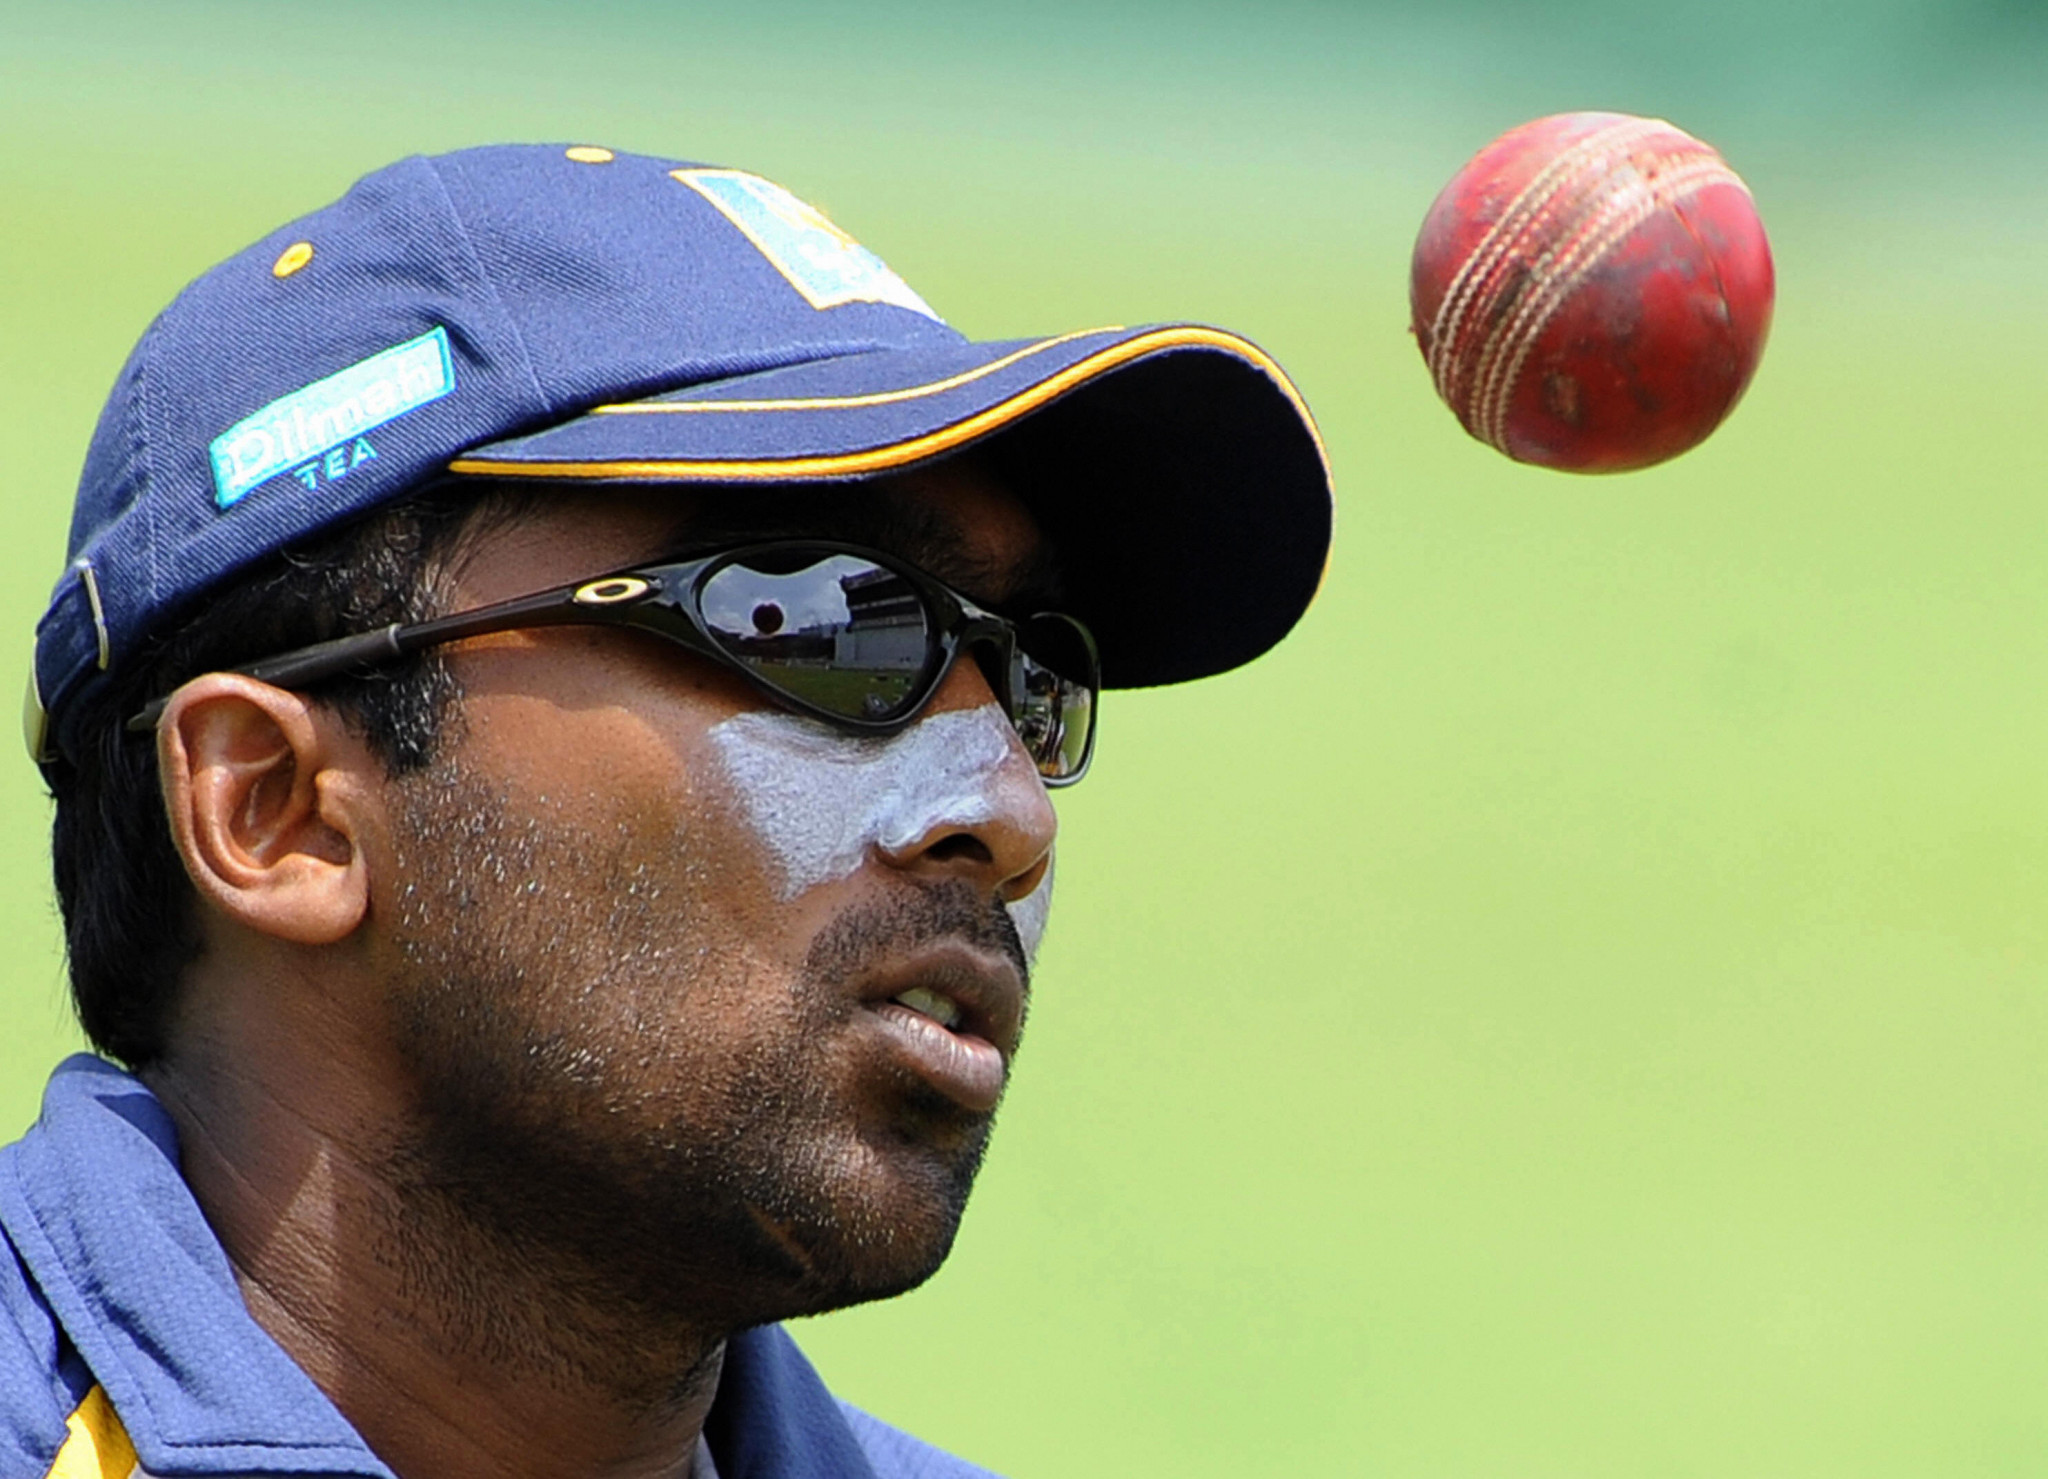 Brittin, Jayawardena and Pollock inducted into ICC Cricket Hall of Fame